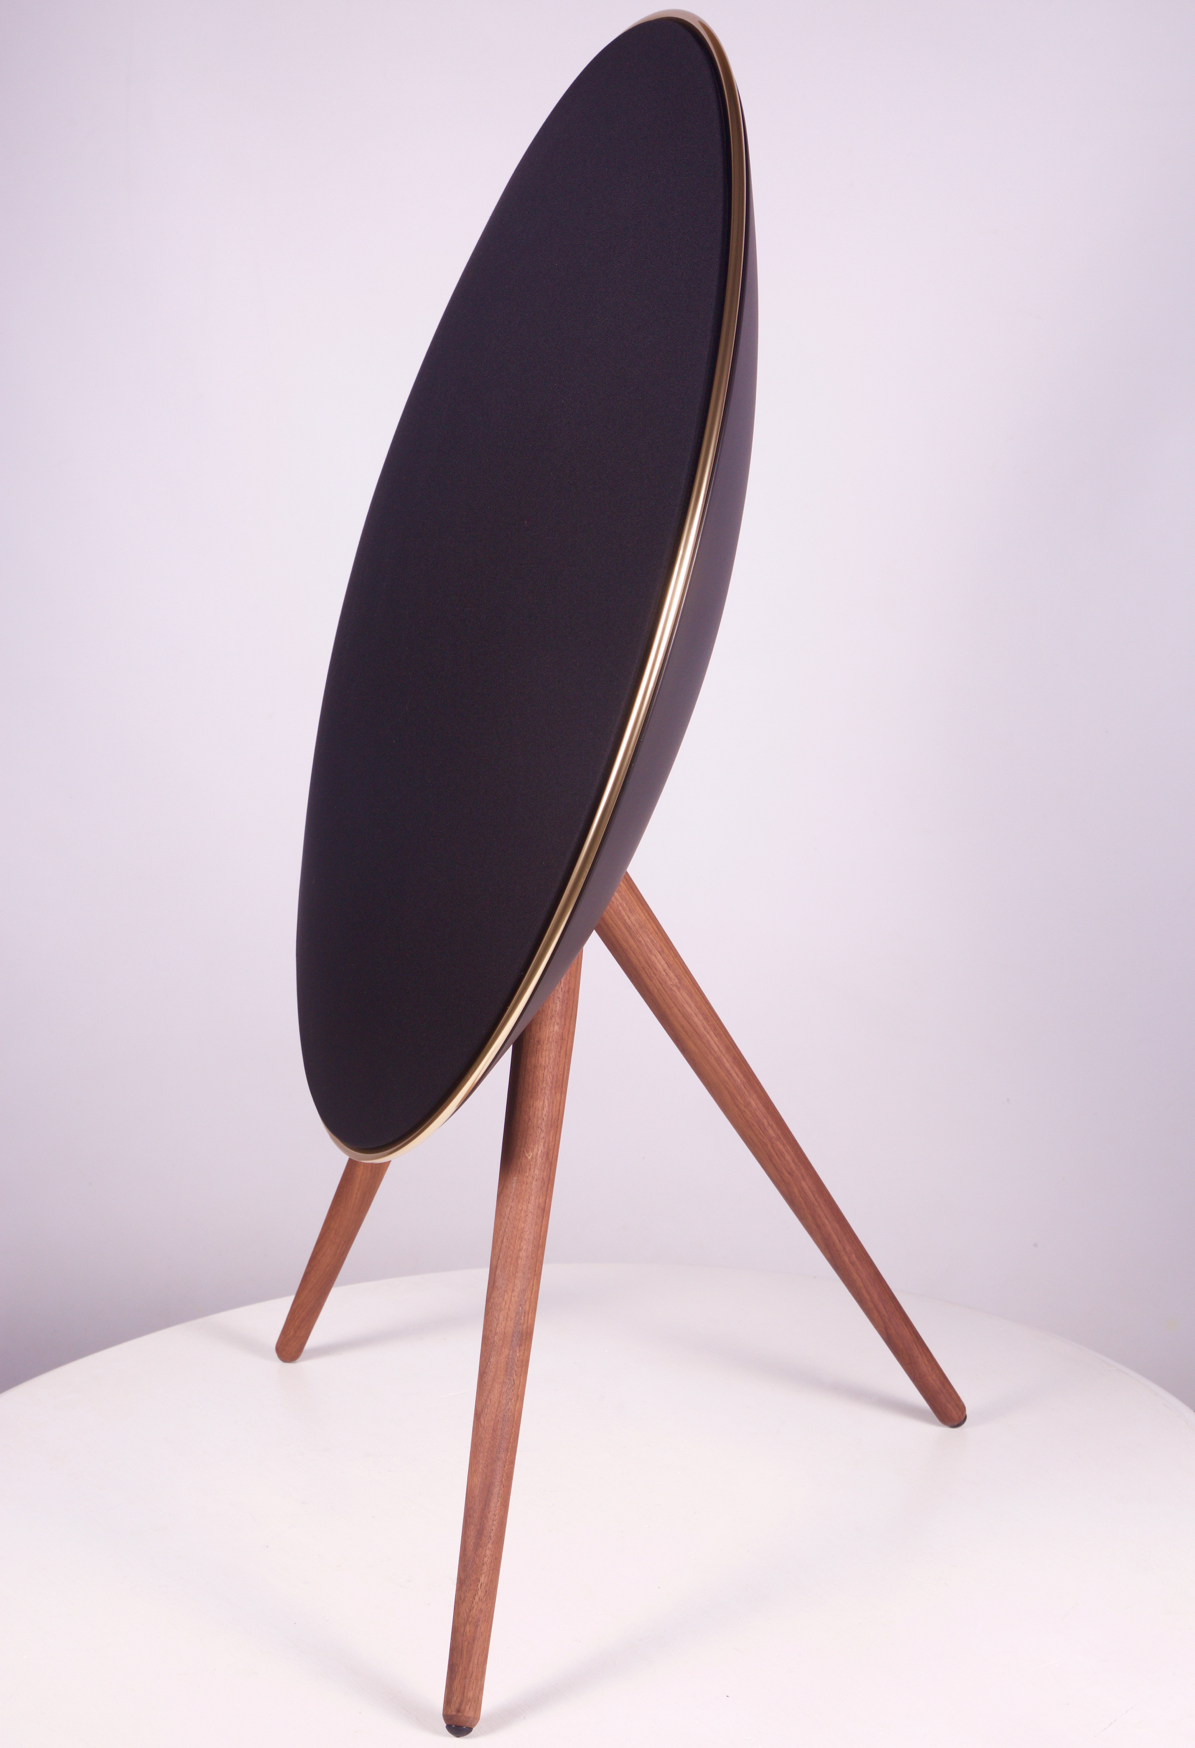 Ordelijk bescherming stoeprand B&O BeoPlay A9 Rose Gold with Walnut Legs - 90th Anniversary Edition